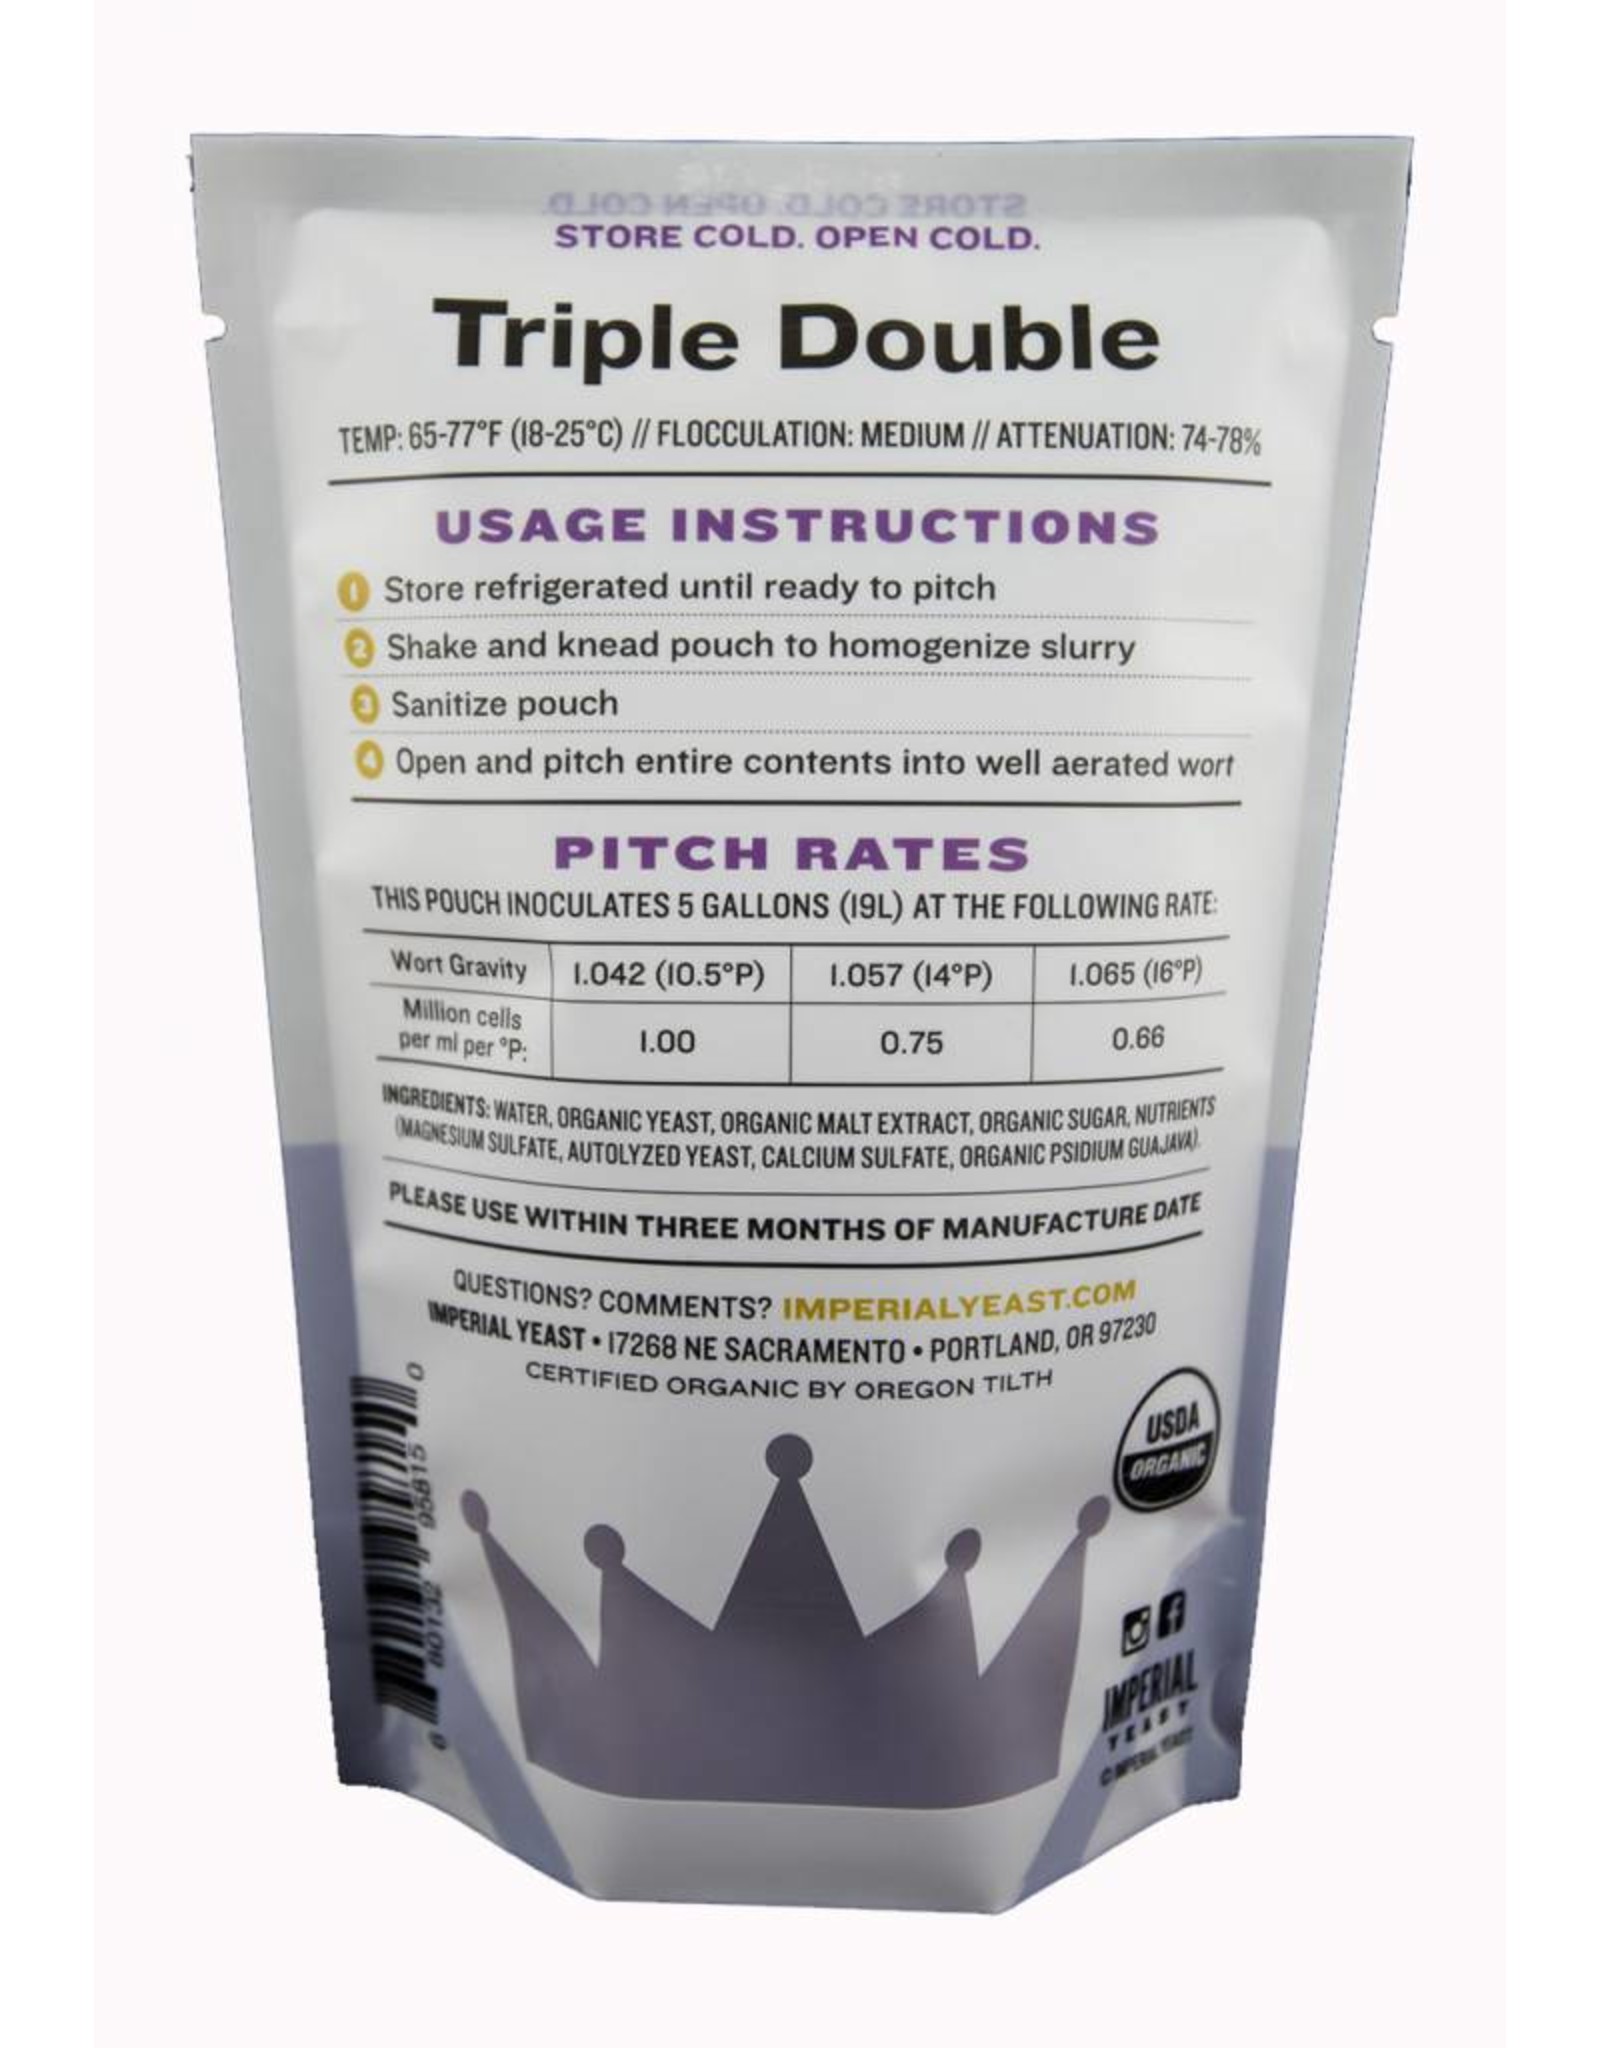 Imperial Yeast Imperial Yeast B48 - Triple Double